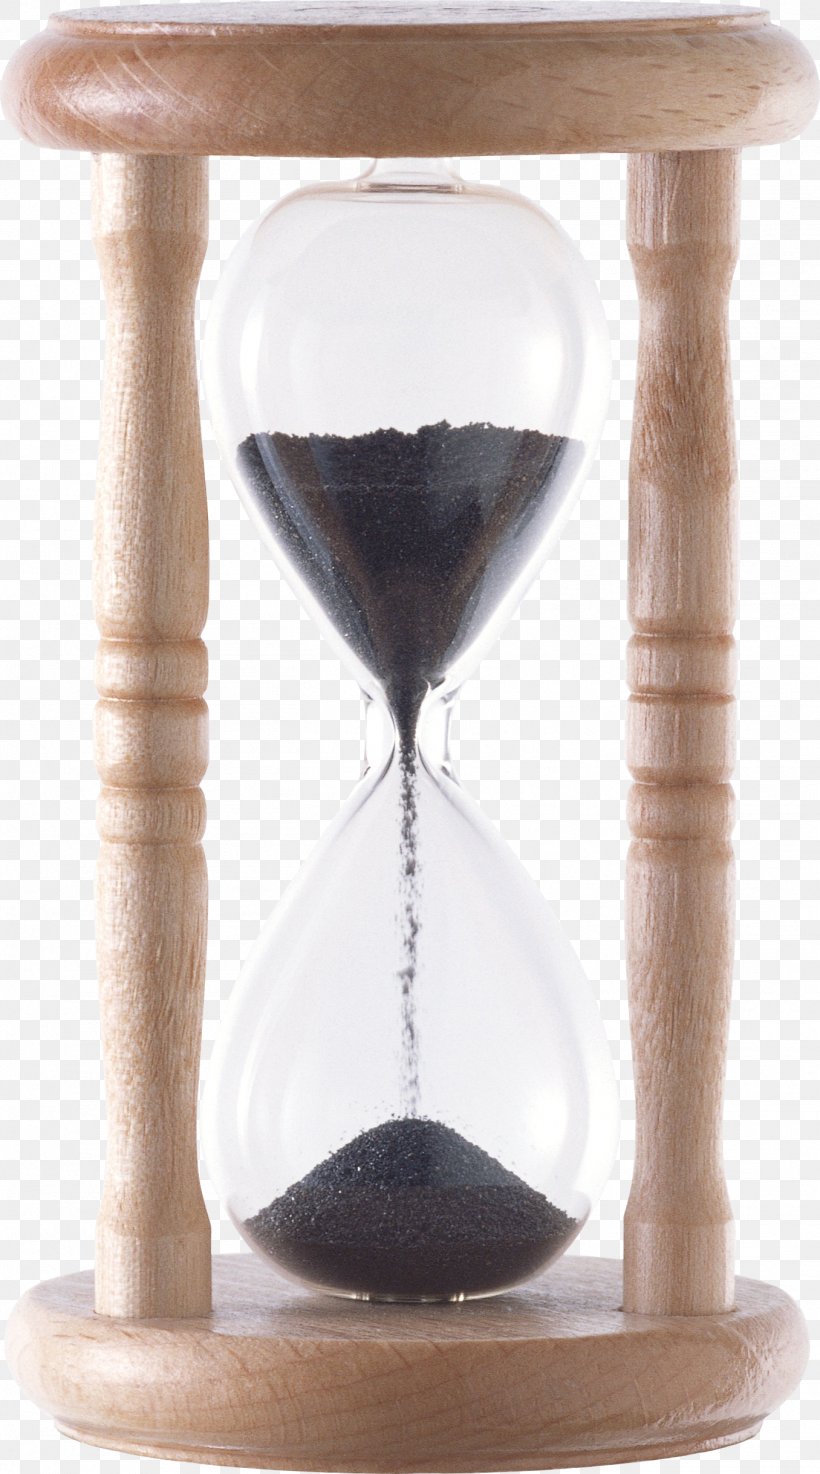 Hourglass Clock Time, PNG, 1356x2438px, Hourglass, Clock, Depositfiles, Raster Graphics, Time Download Free